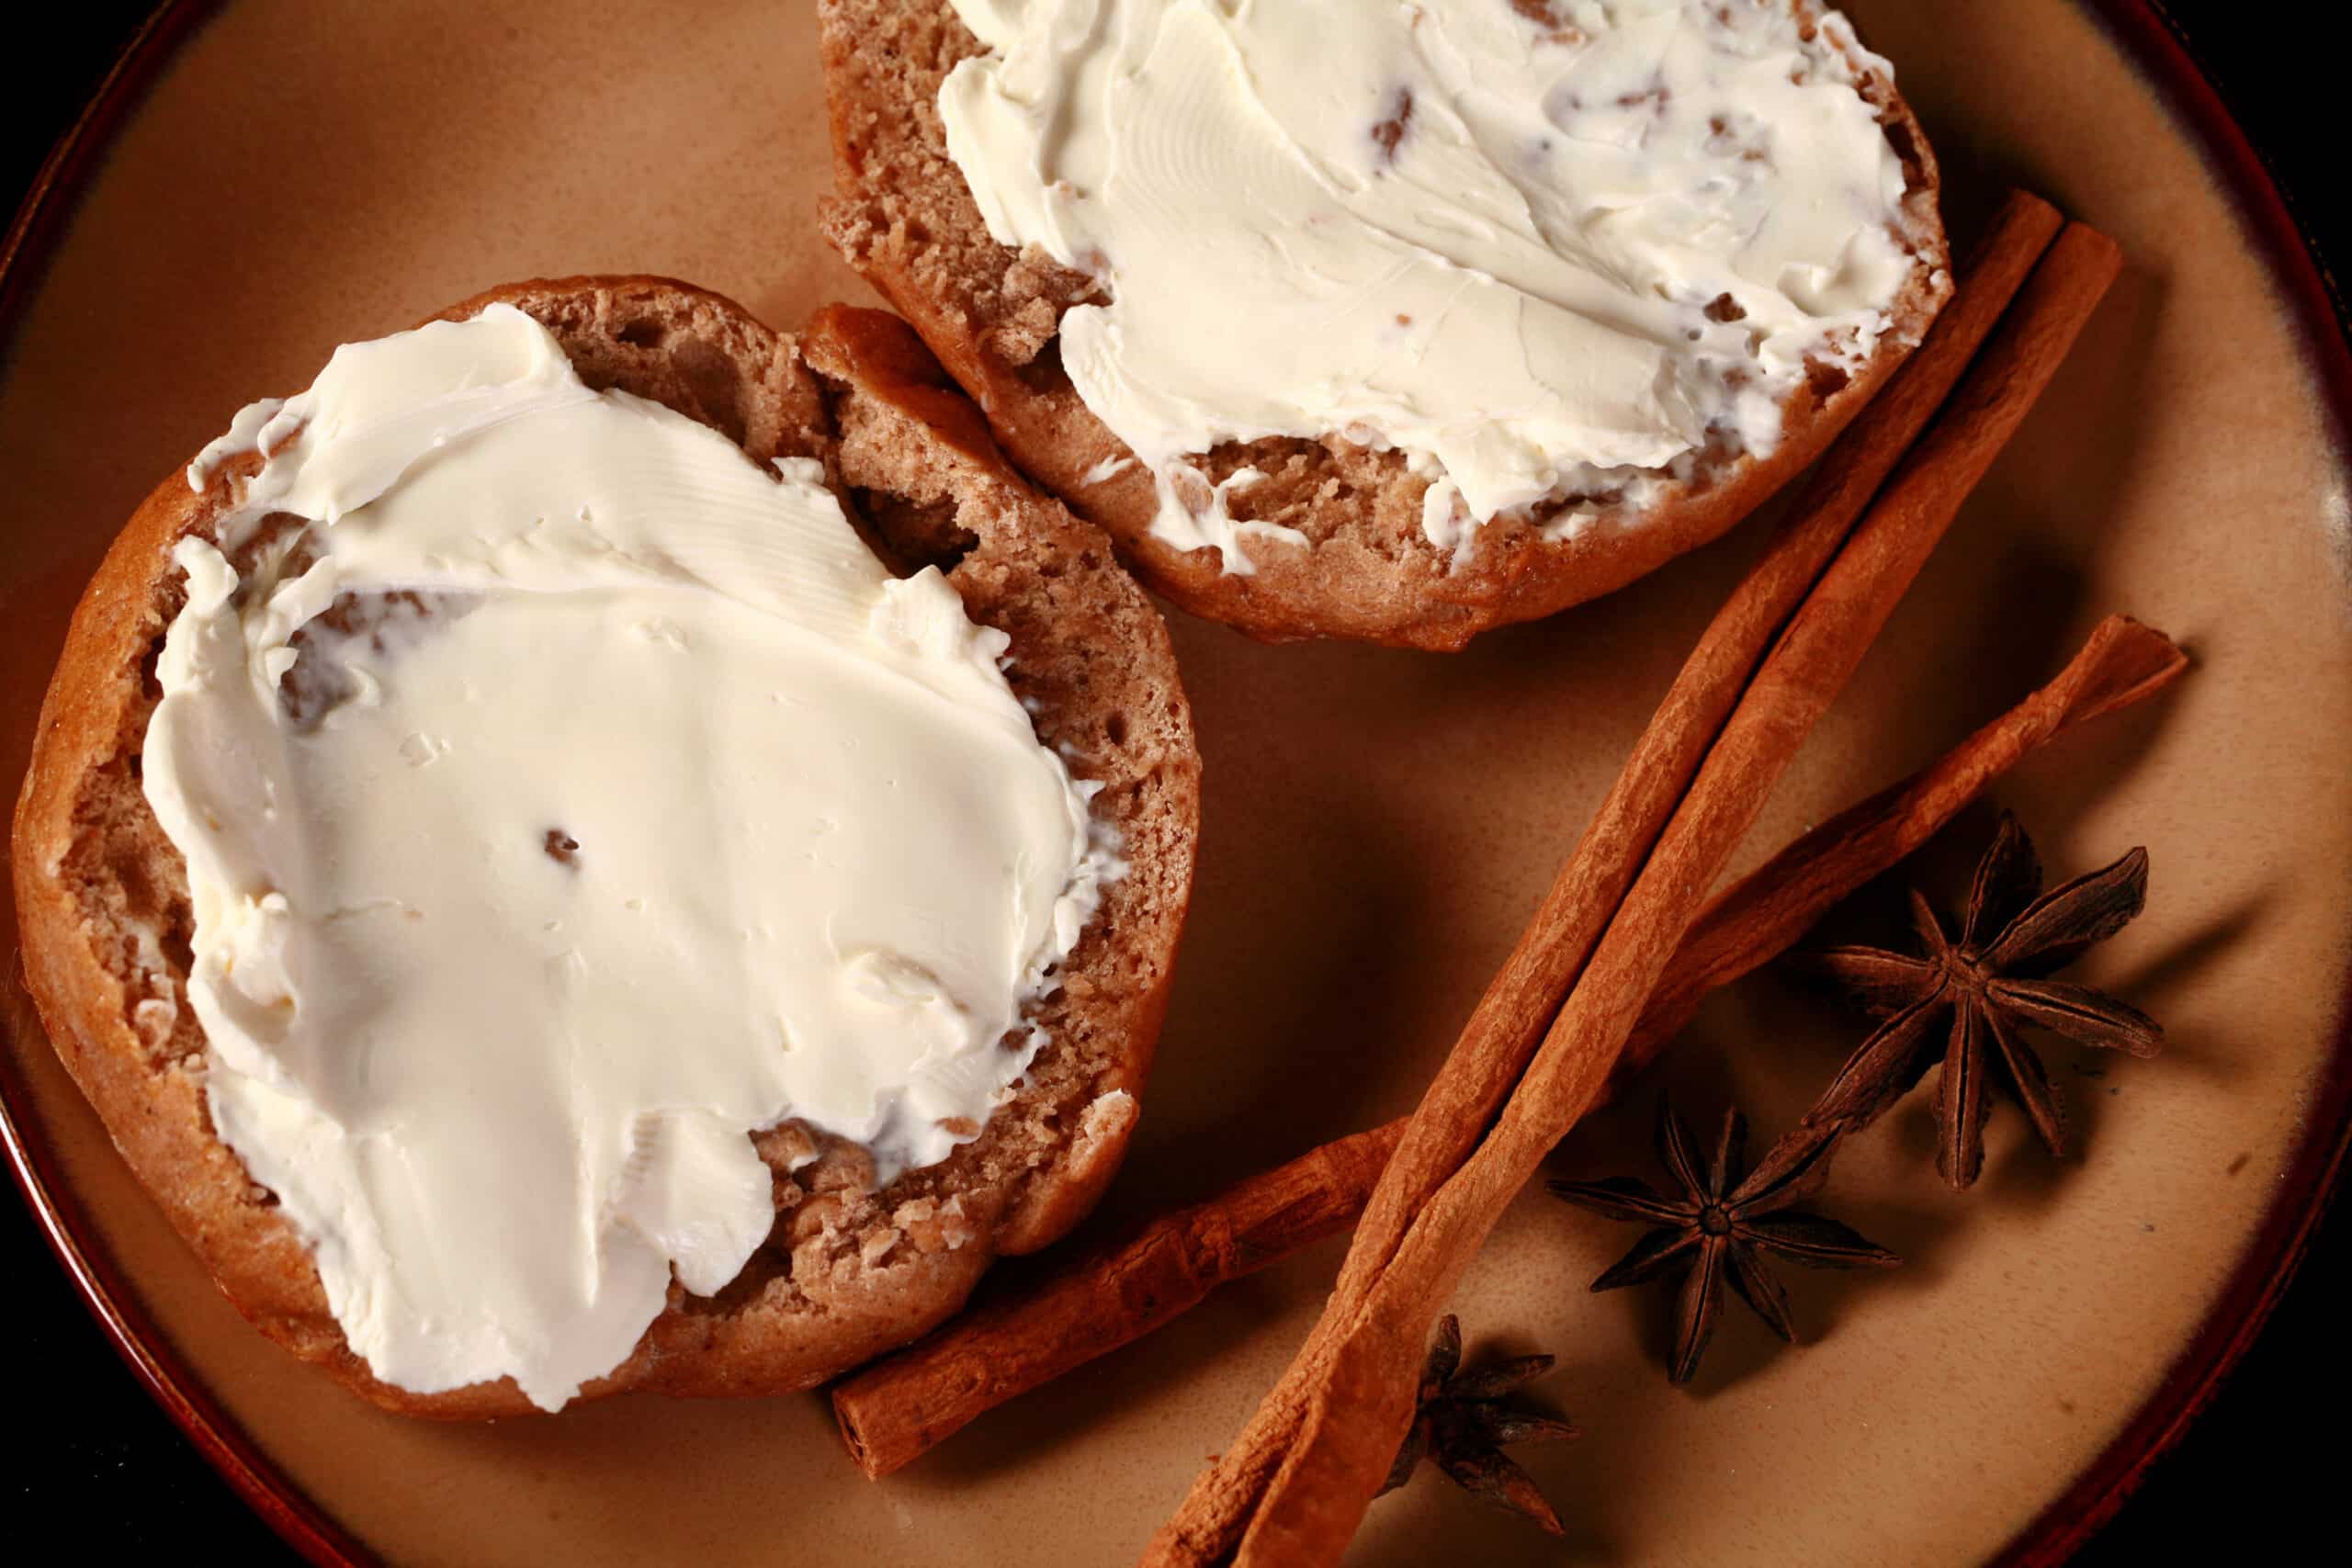 A split open chai spice bagel with cream cheese, on a plate with cinnamon sticks and star anise on the side.